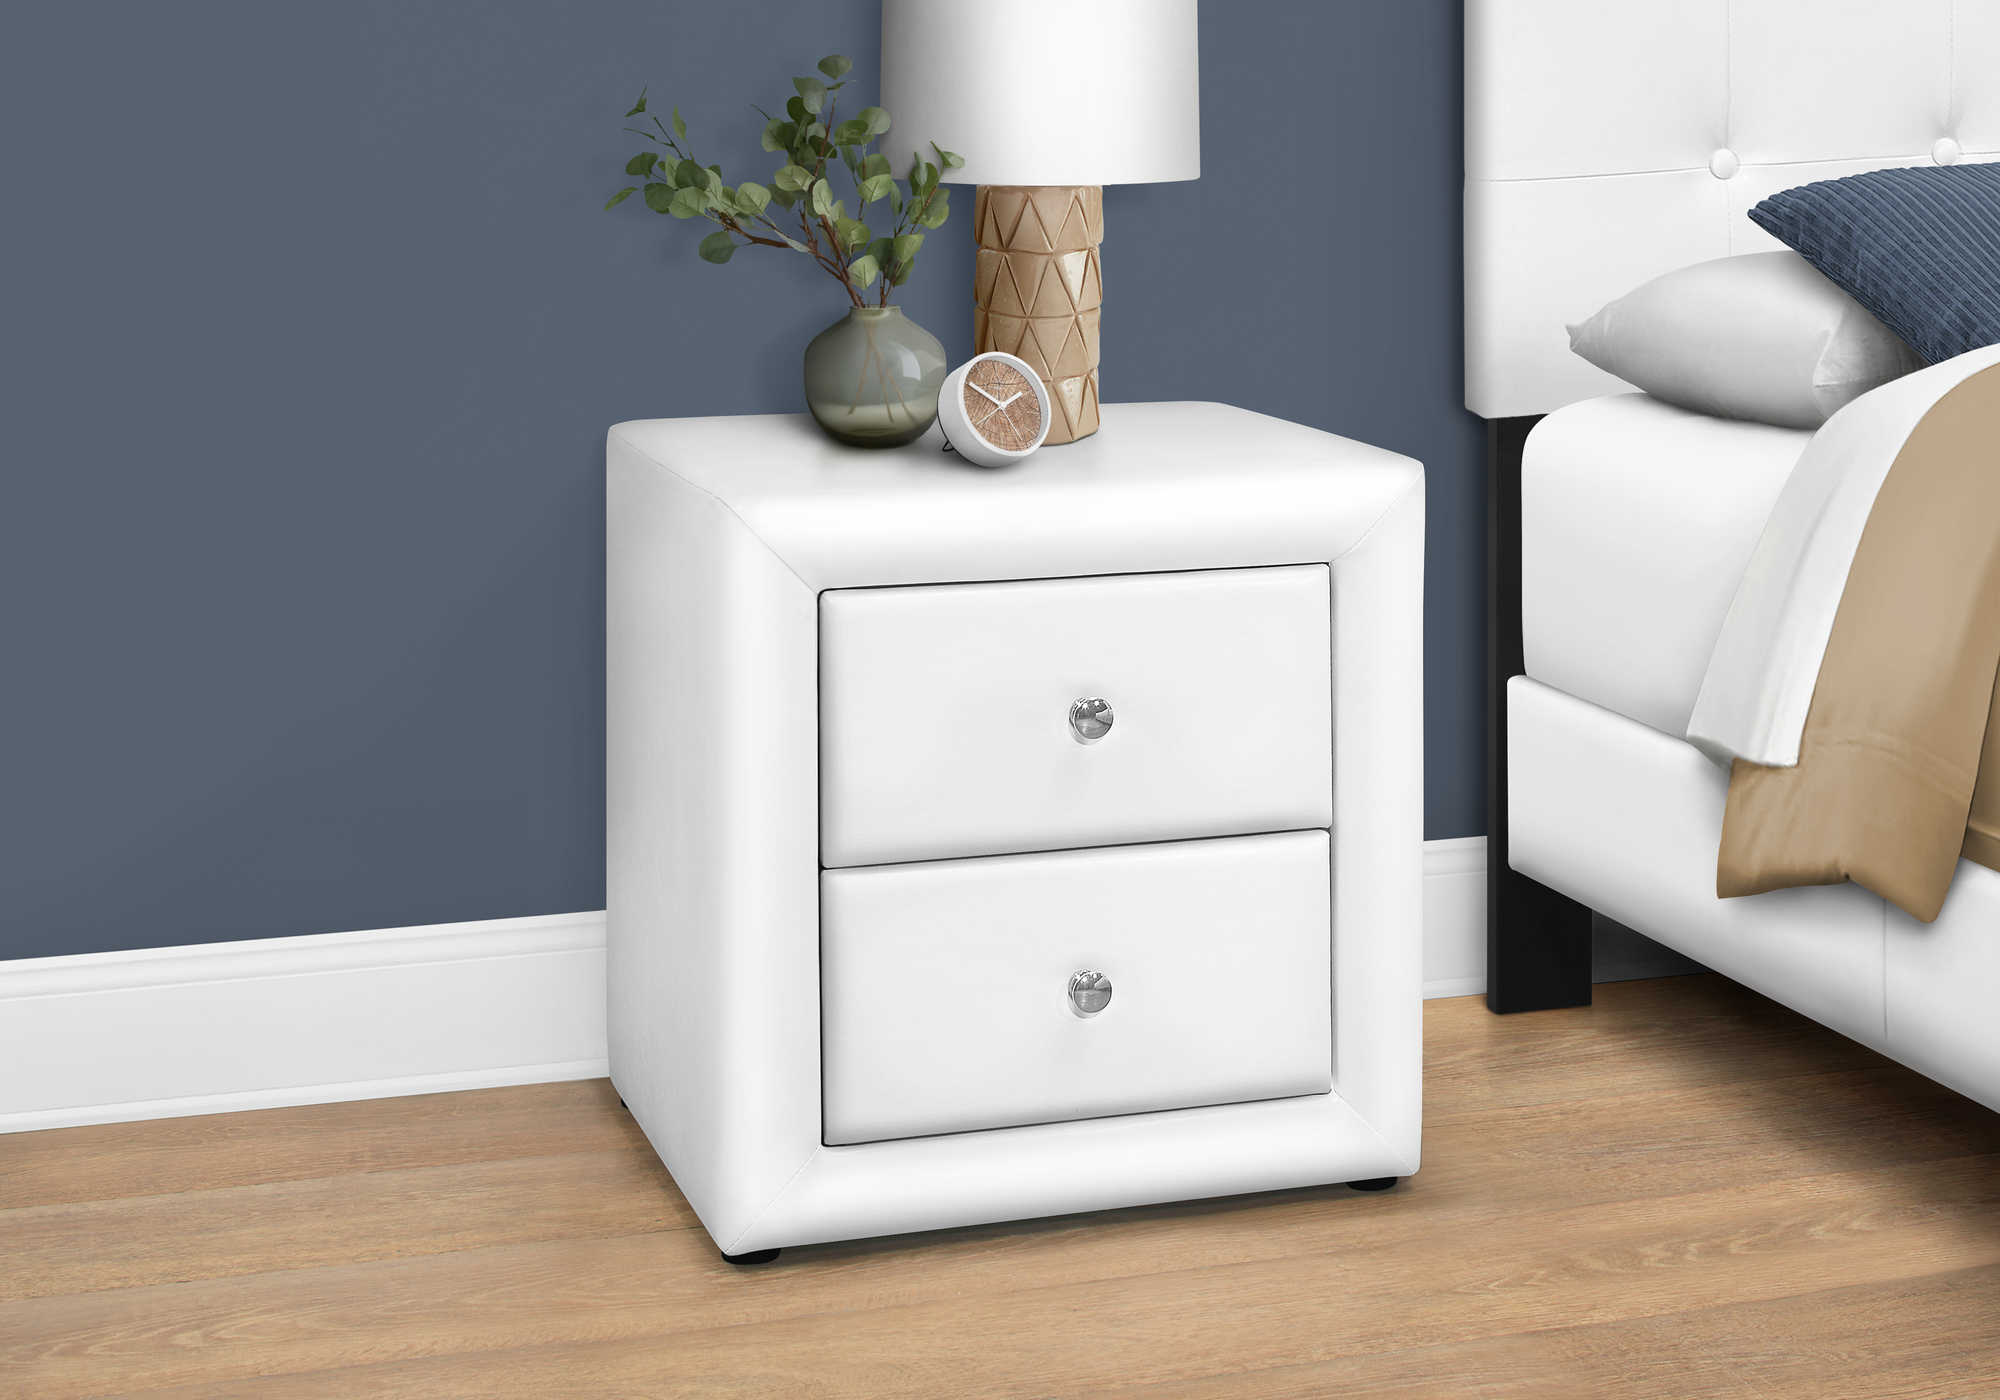 NIGHTSTAND - 21"H / WHITE LEATHER-LOOK